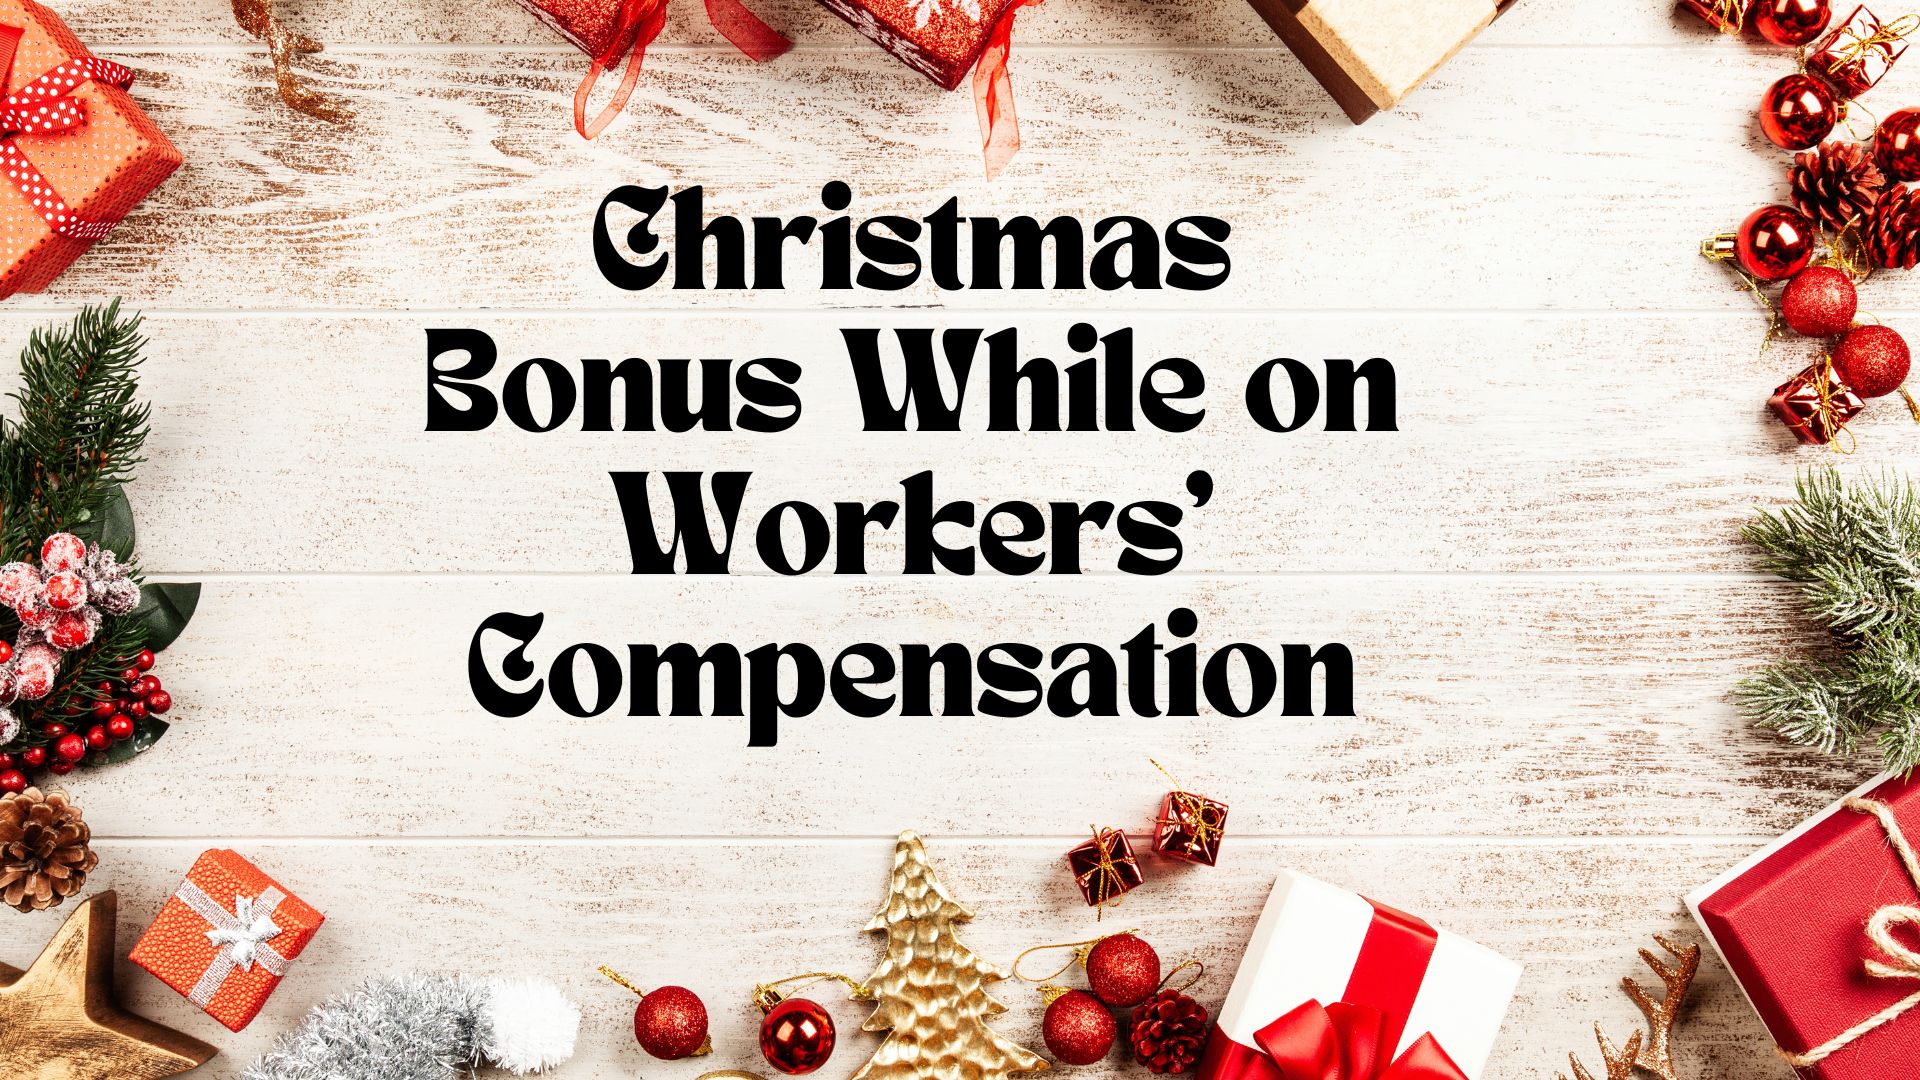 Christmas Bonus While on Workers' Compensation